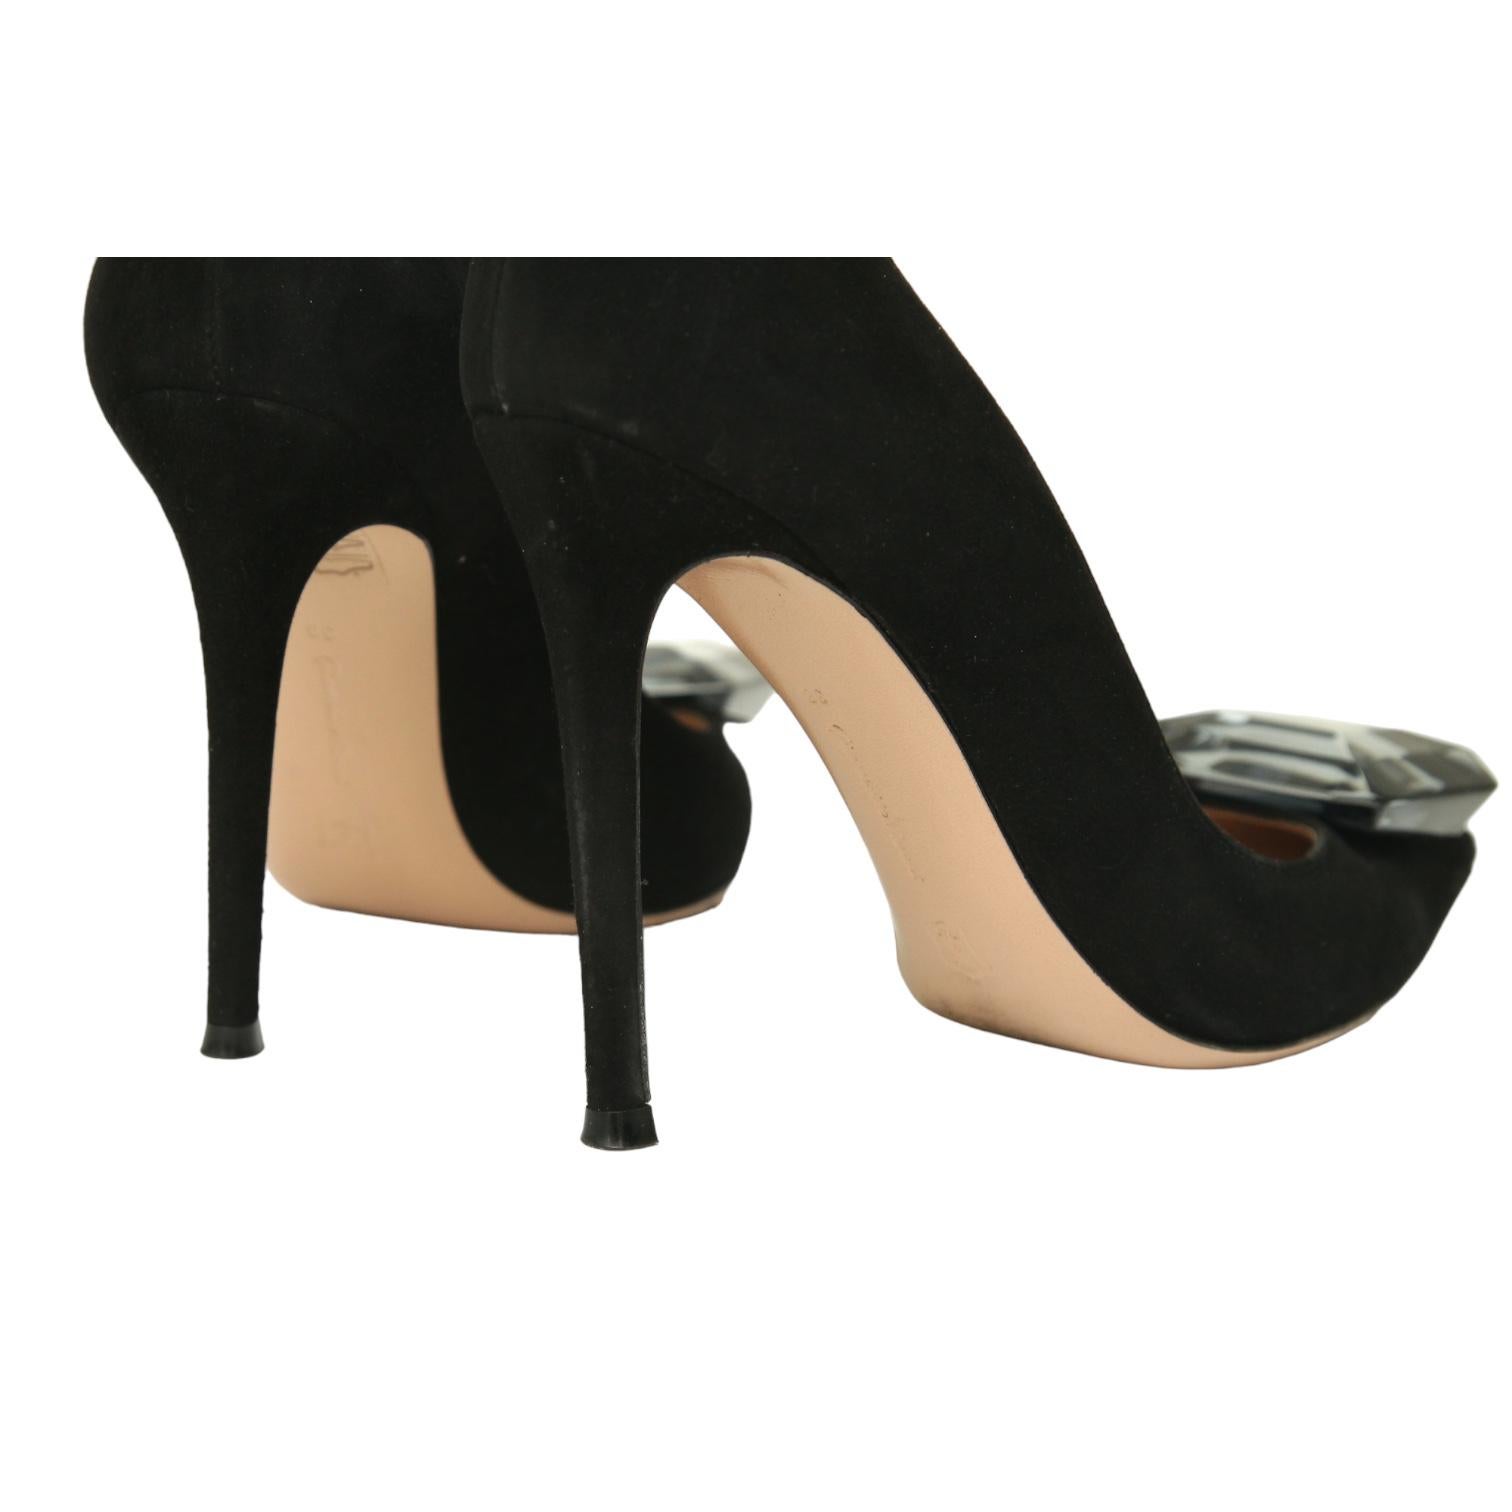 GIANVITO ROSSI Black Suede Leather Pump JAIPUR Crystal Pointed Toe 38 $1200 For Sale 5